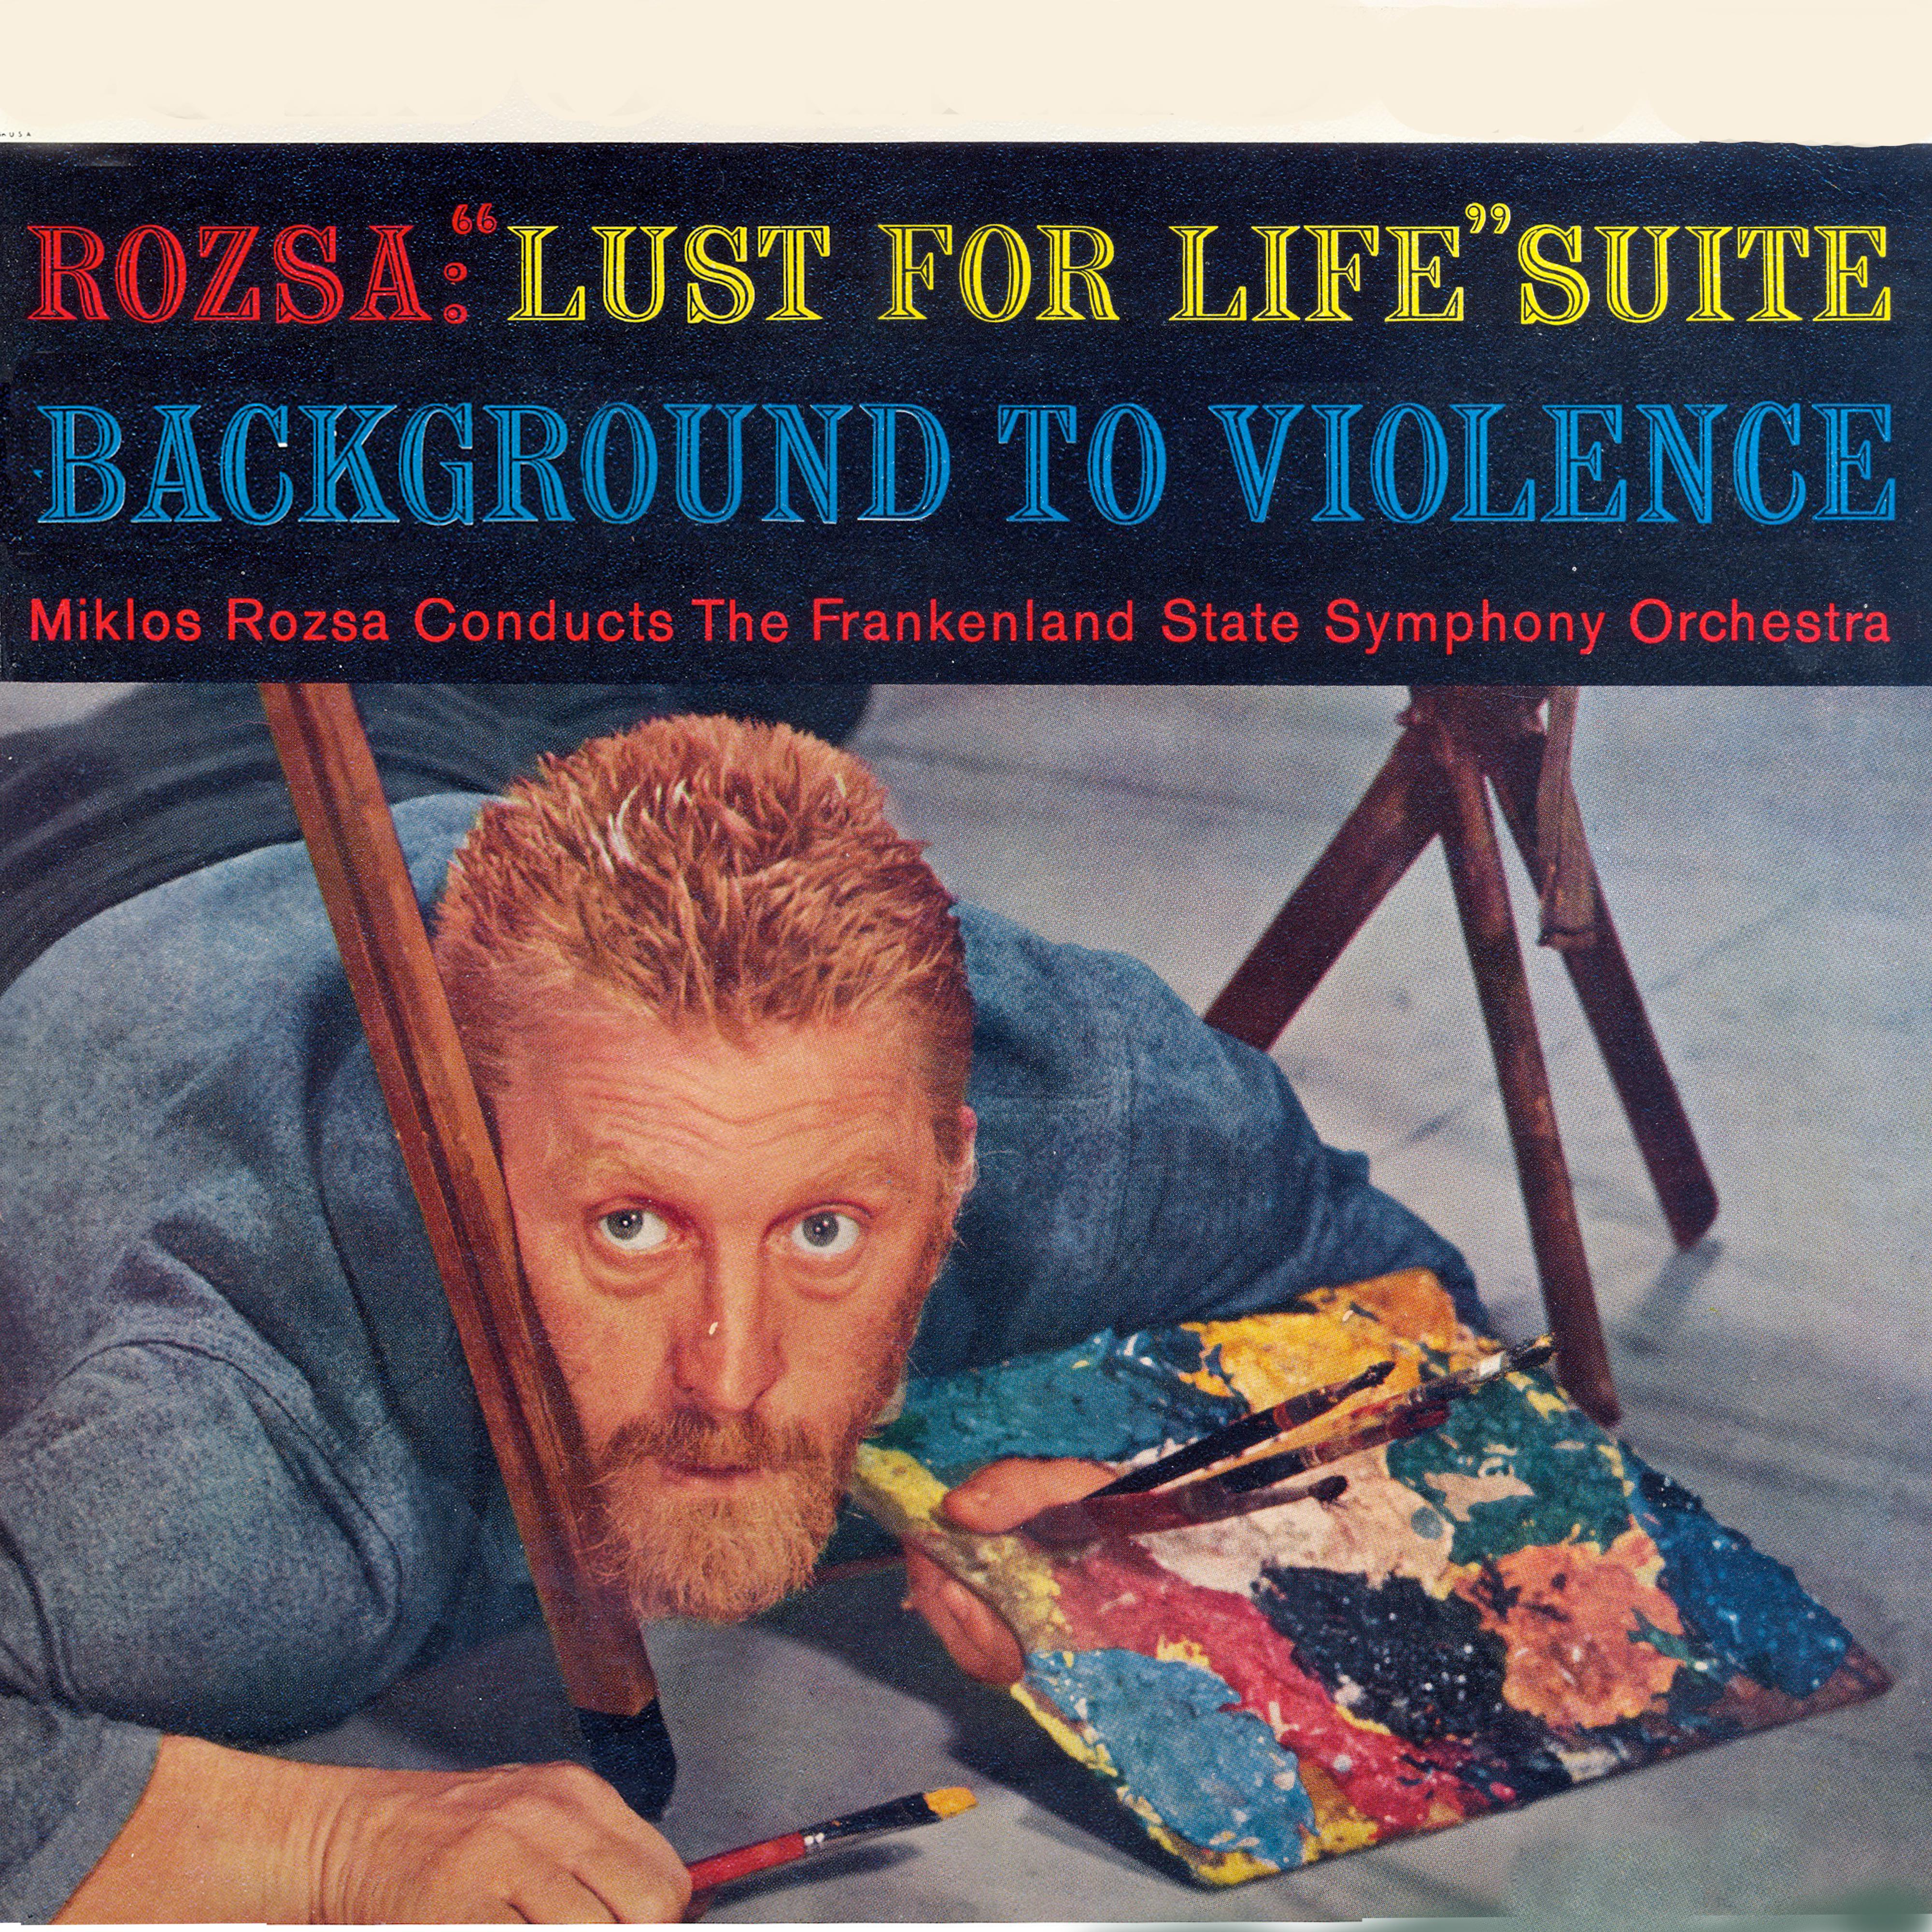 Lust for life Suite - Background to Violence (Complete 1956 version)